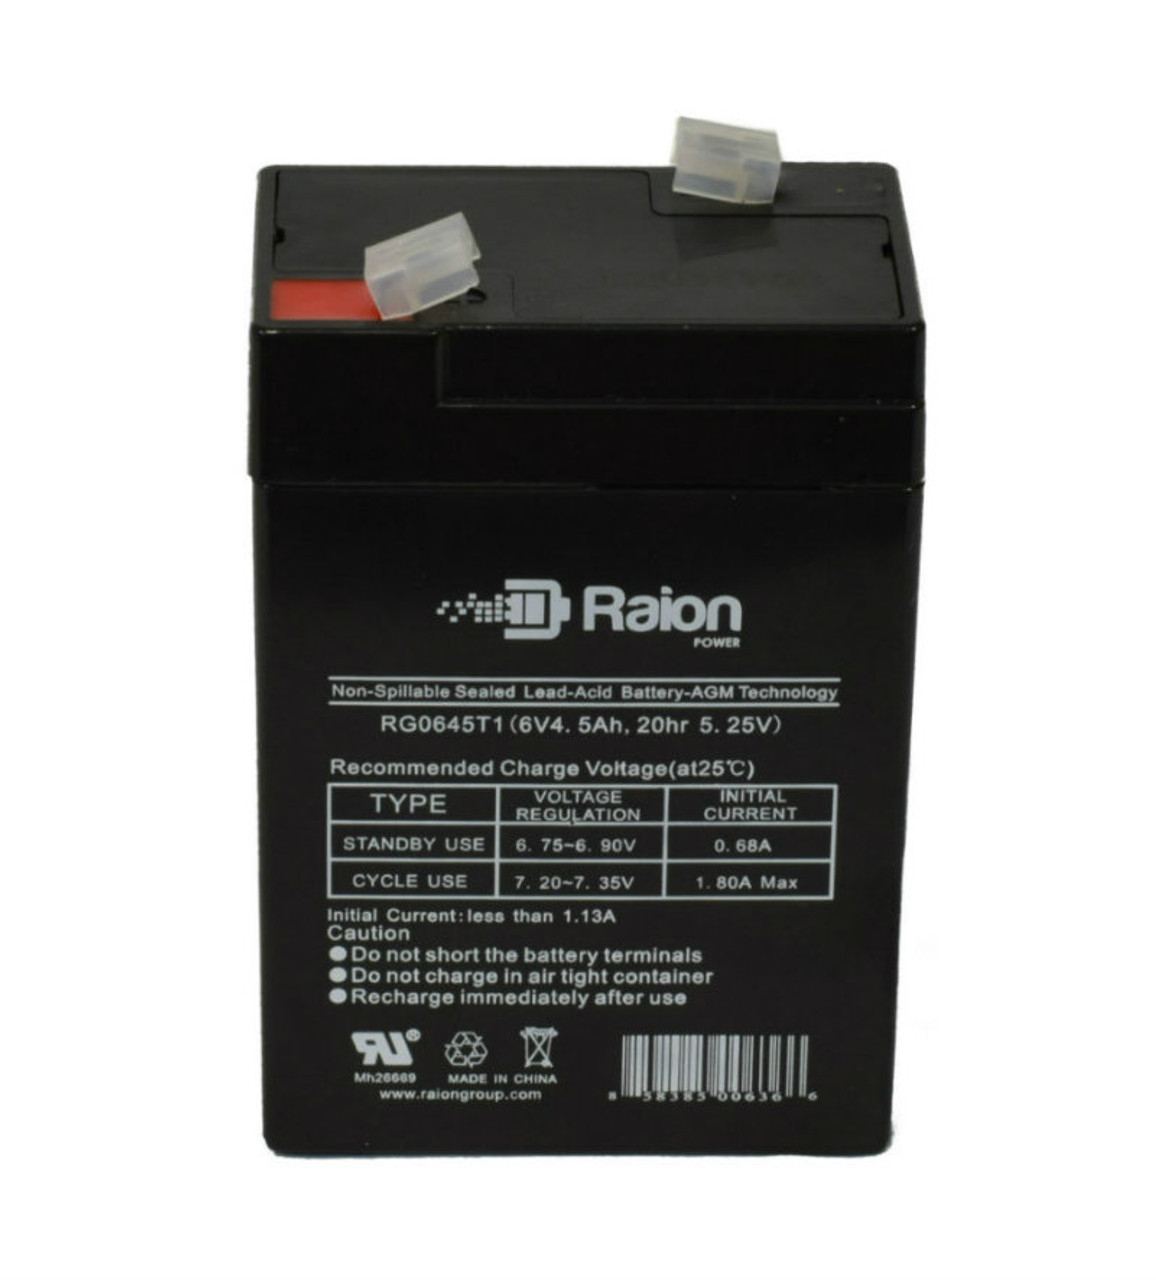 Raion Power RG0645T1 Replacement Battery Cartridge for MHB MS4-6